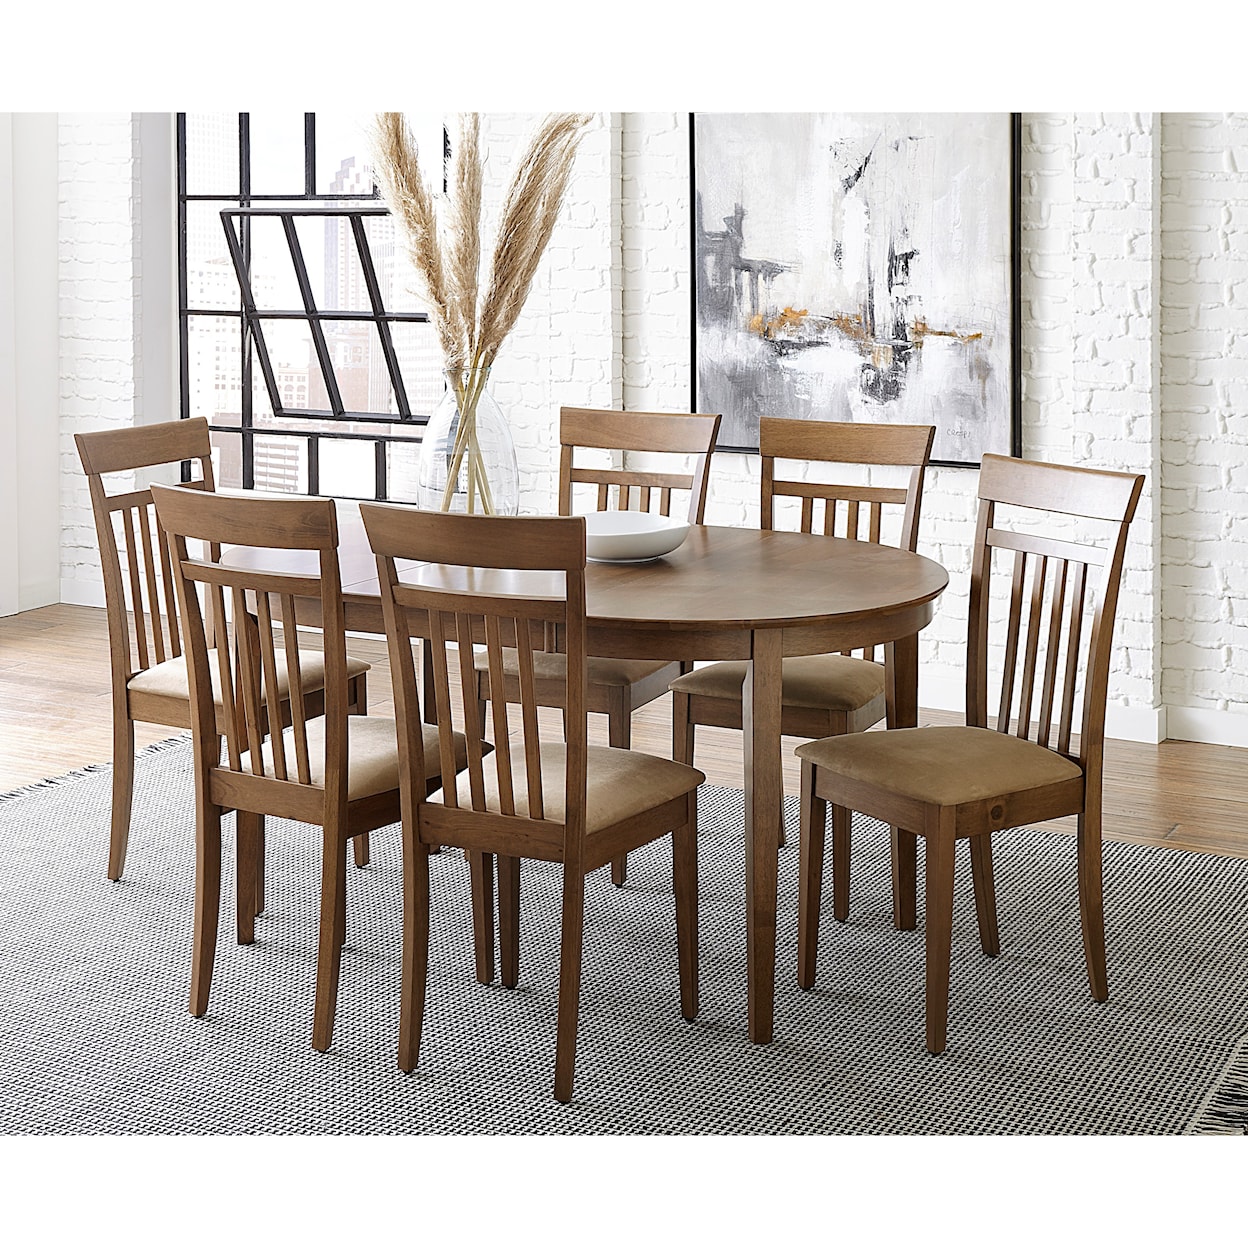 Carolina Chairs Palmer 7-Piece Table and Chair Set